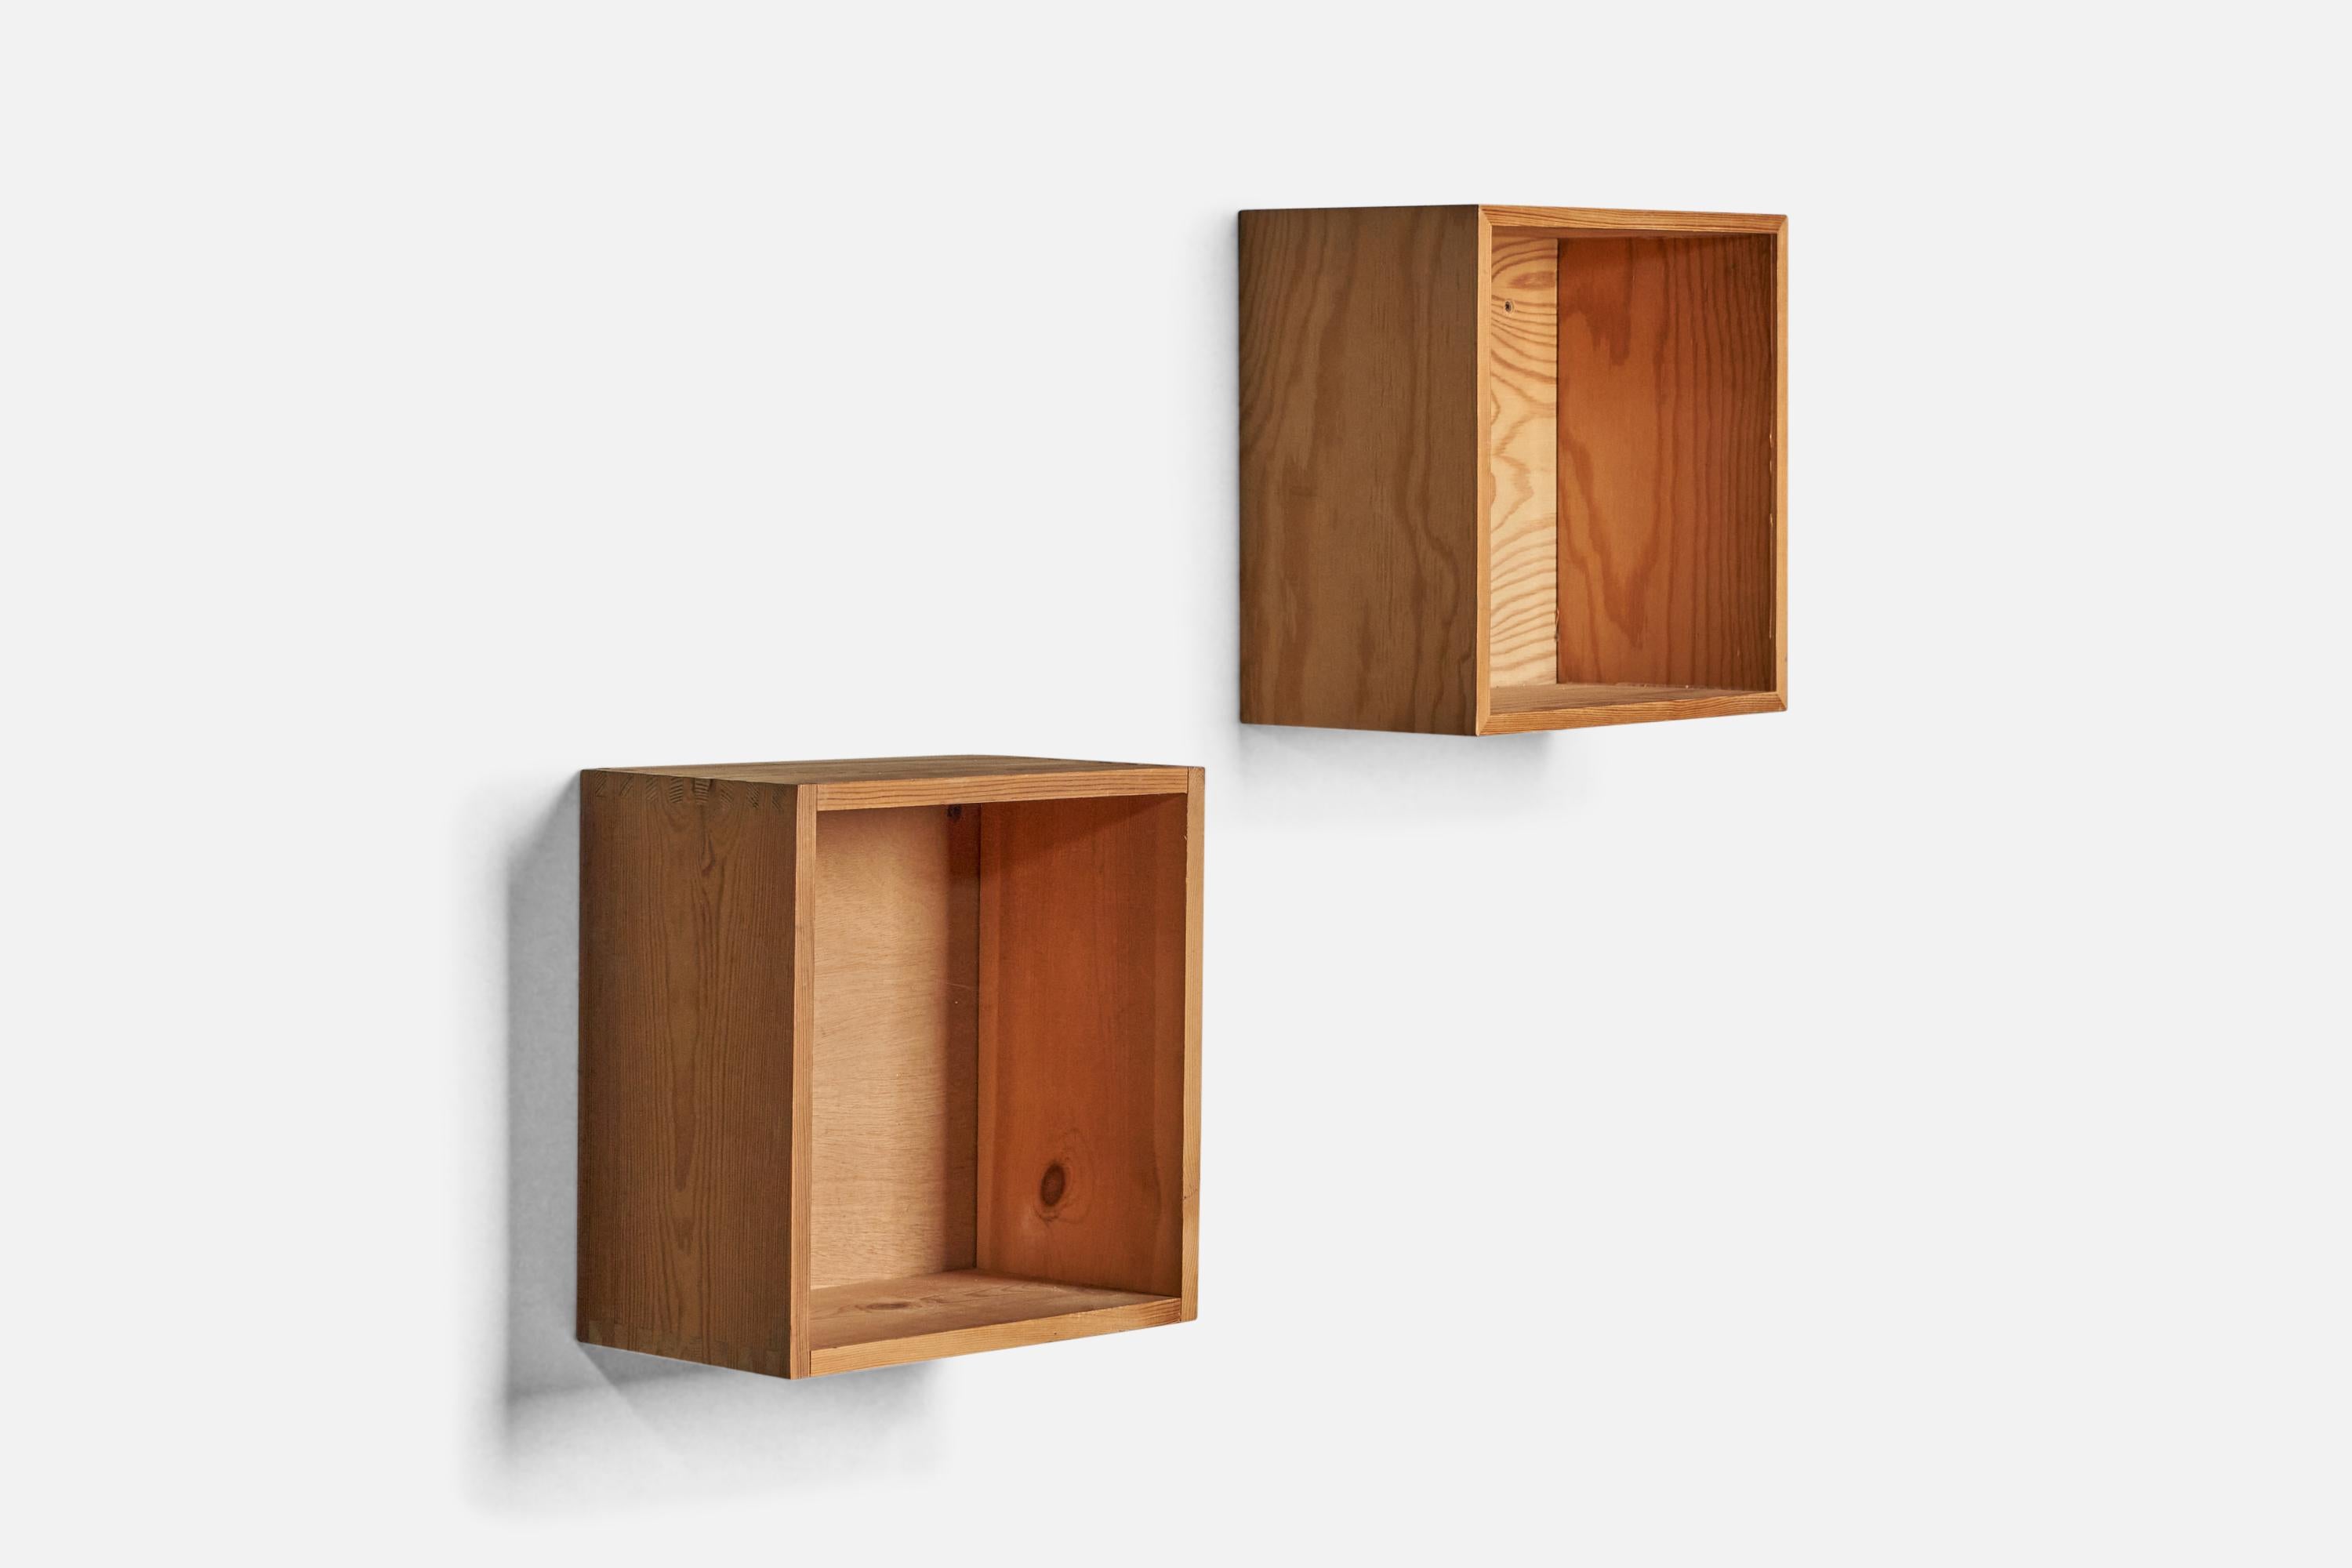 A pair of small wall-mounted pine cabinets or nightstands designed and produced in Denmark, 1970s.

One is 7” H, making it 0.5” taller than the other.